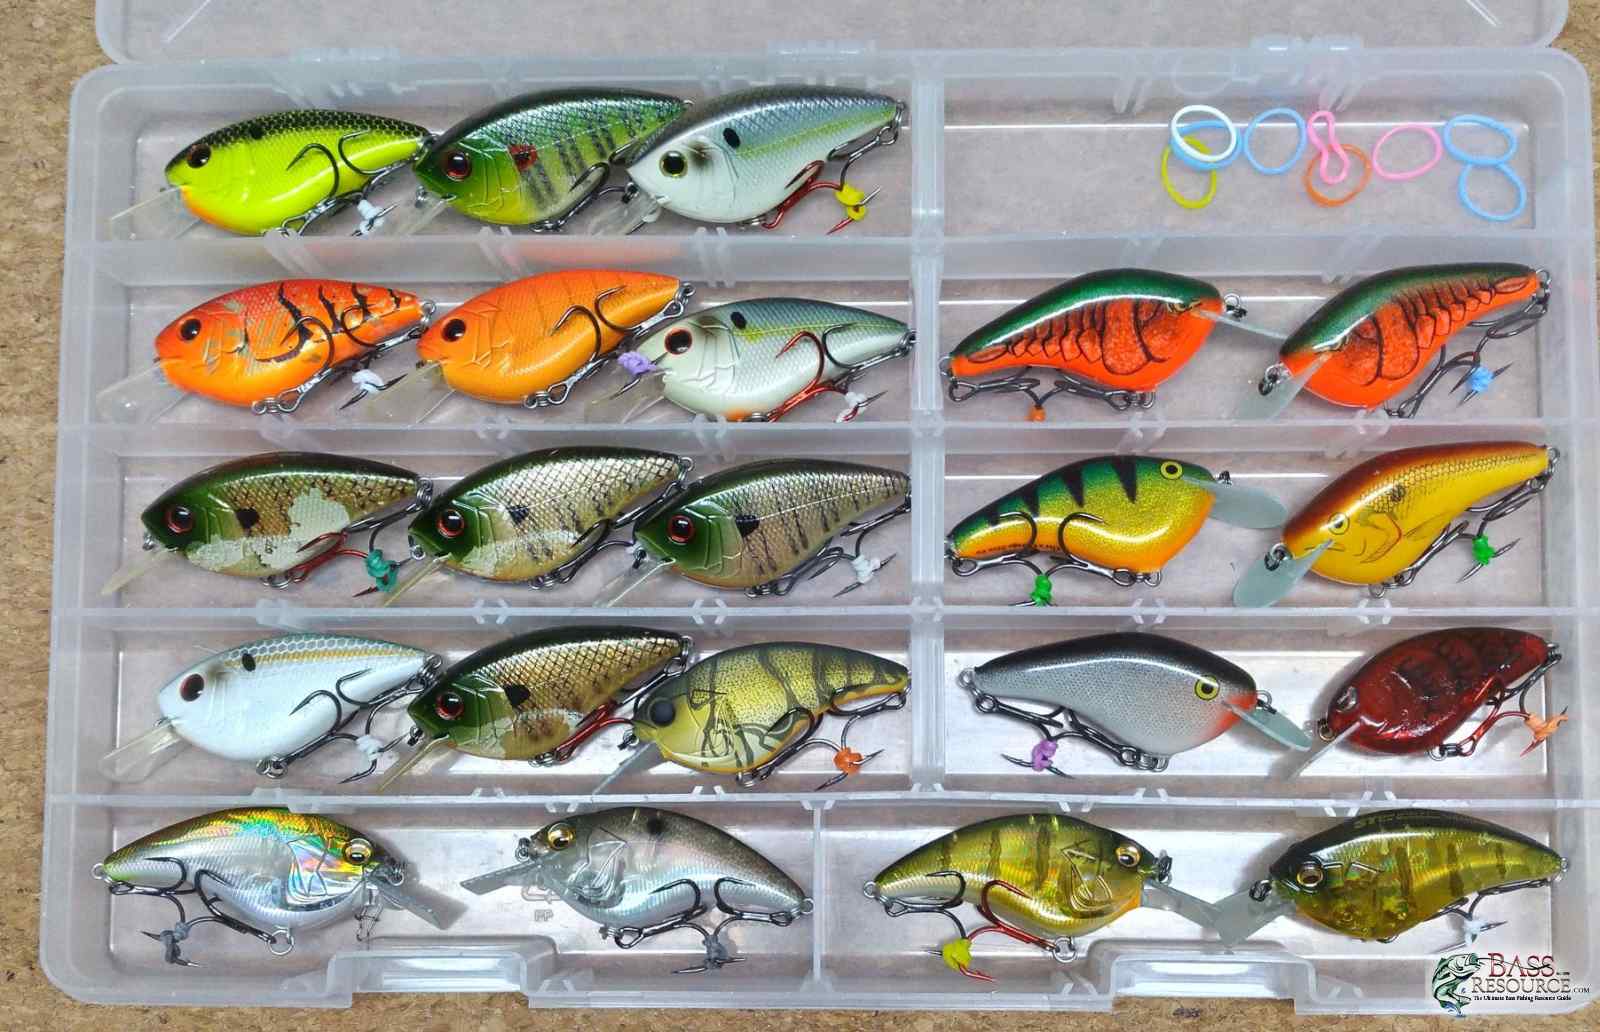 Flat sided crankbait craze - options and experiences? - Fishing